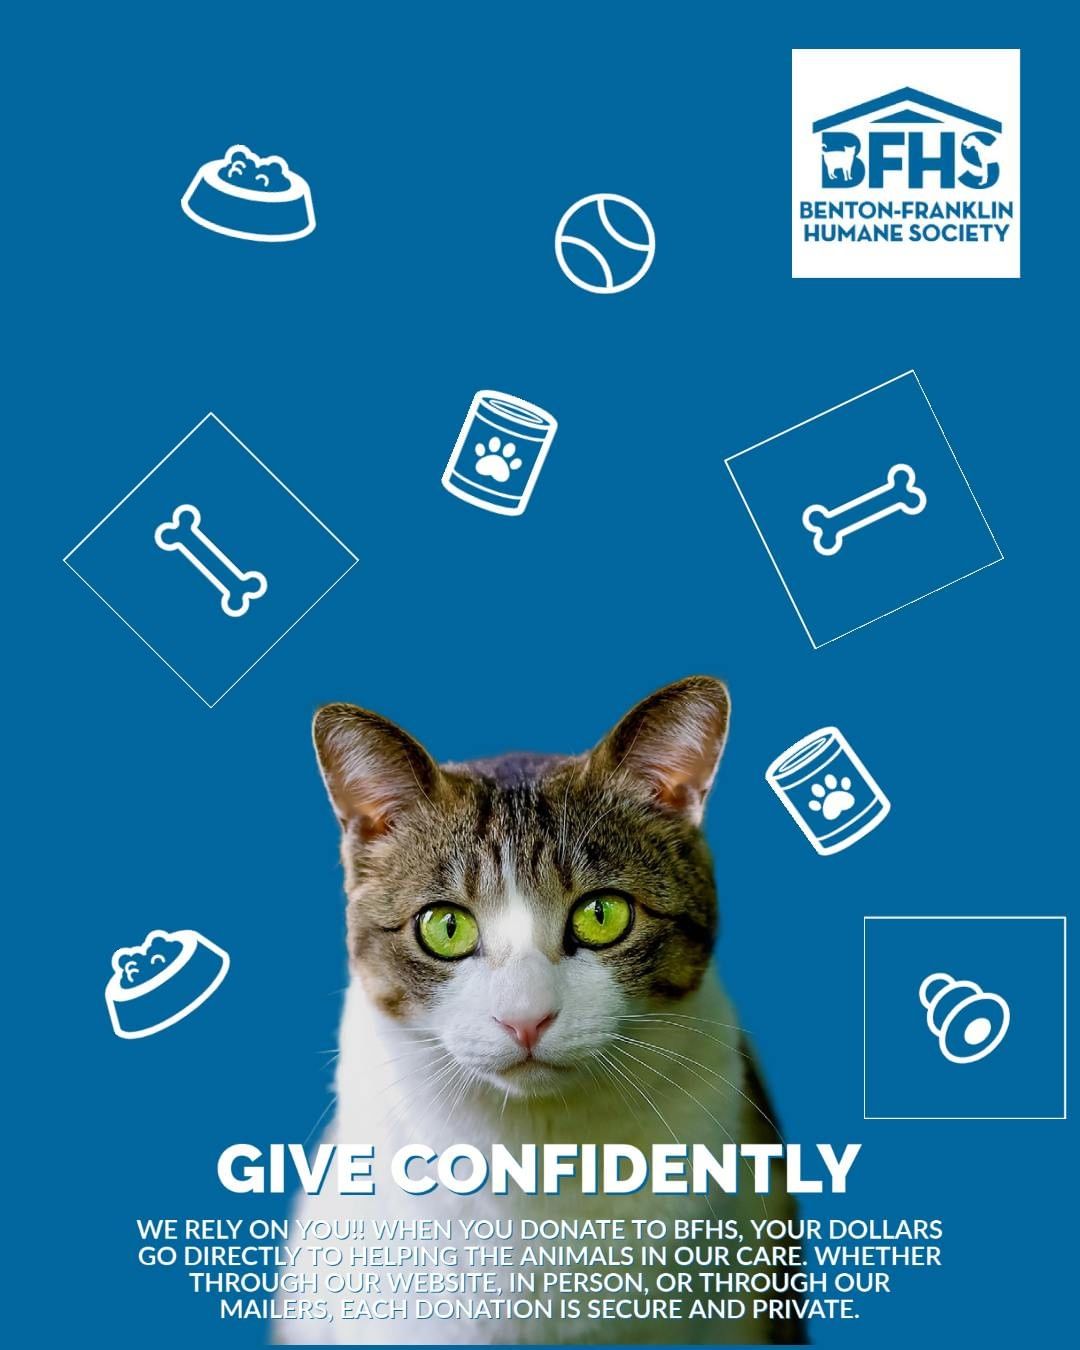 BFHS strives to maintain donor confidence through annual audits, secure donation platforms, & transparency.  We are proud to meet the BBB’s Twenty Standards of Charitable Accountability, maintain Guidestar's Gold Seal of Transparency, and publish our policies & bylaws on our website.  When you give to BFHS, do so confidently & know the animals are at the heart of everything we do.